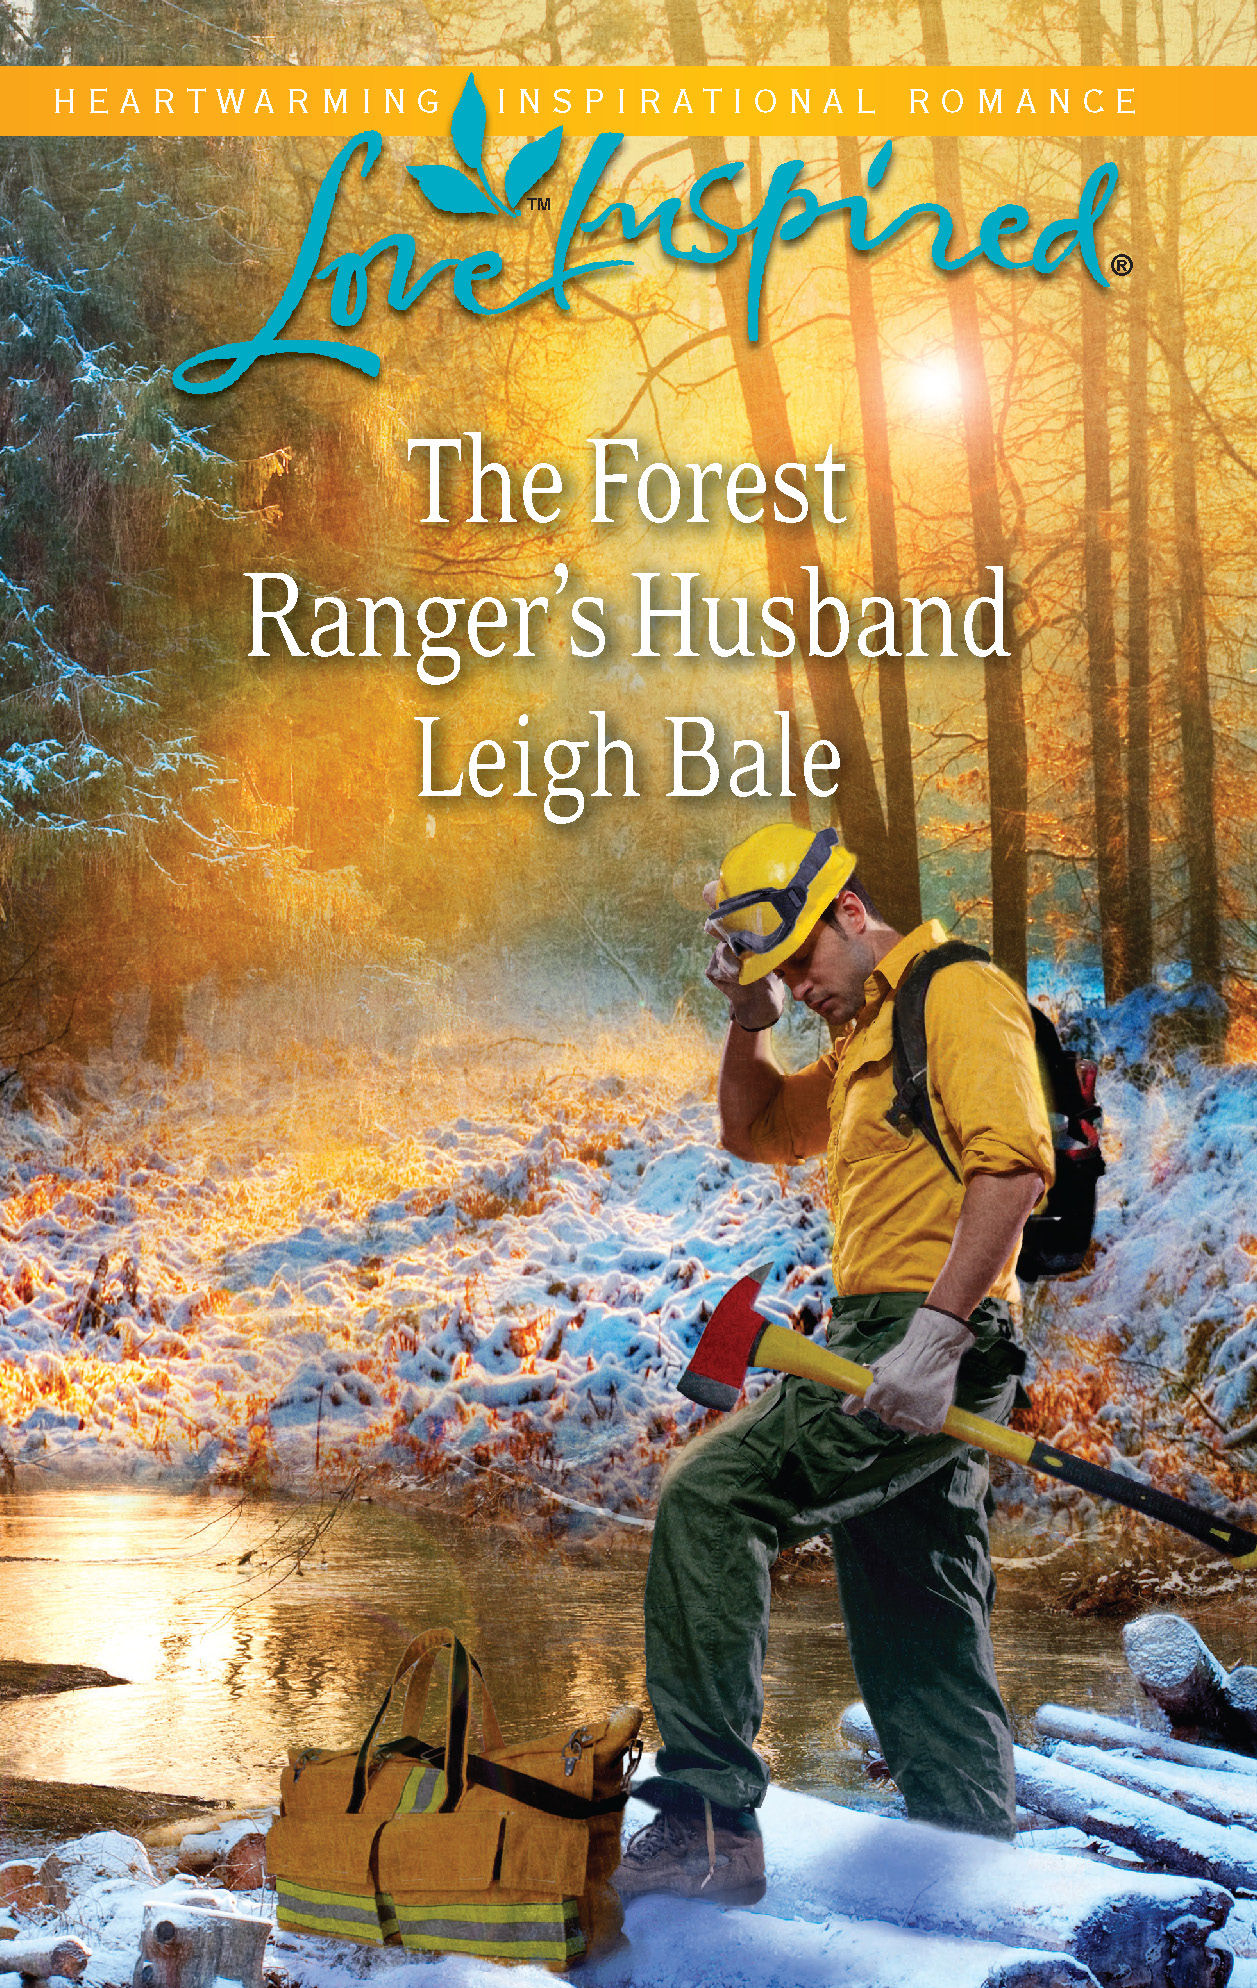 The Forest Ranger's Husband by Leigh Bale